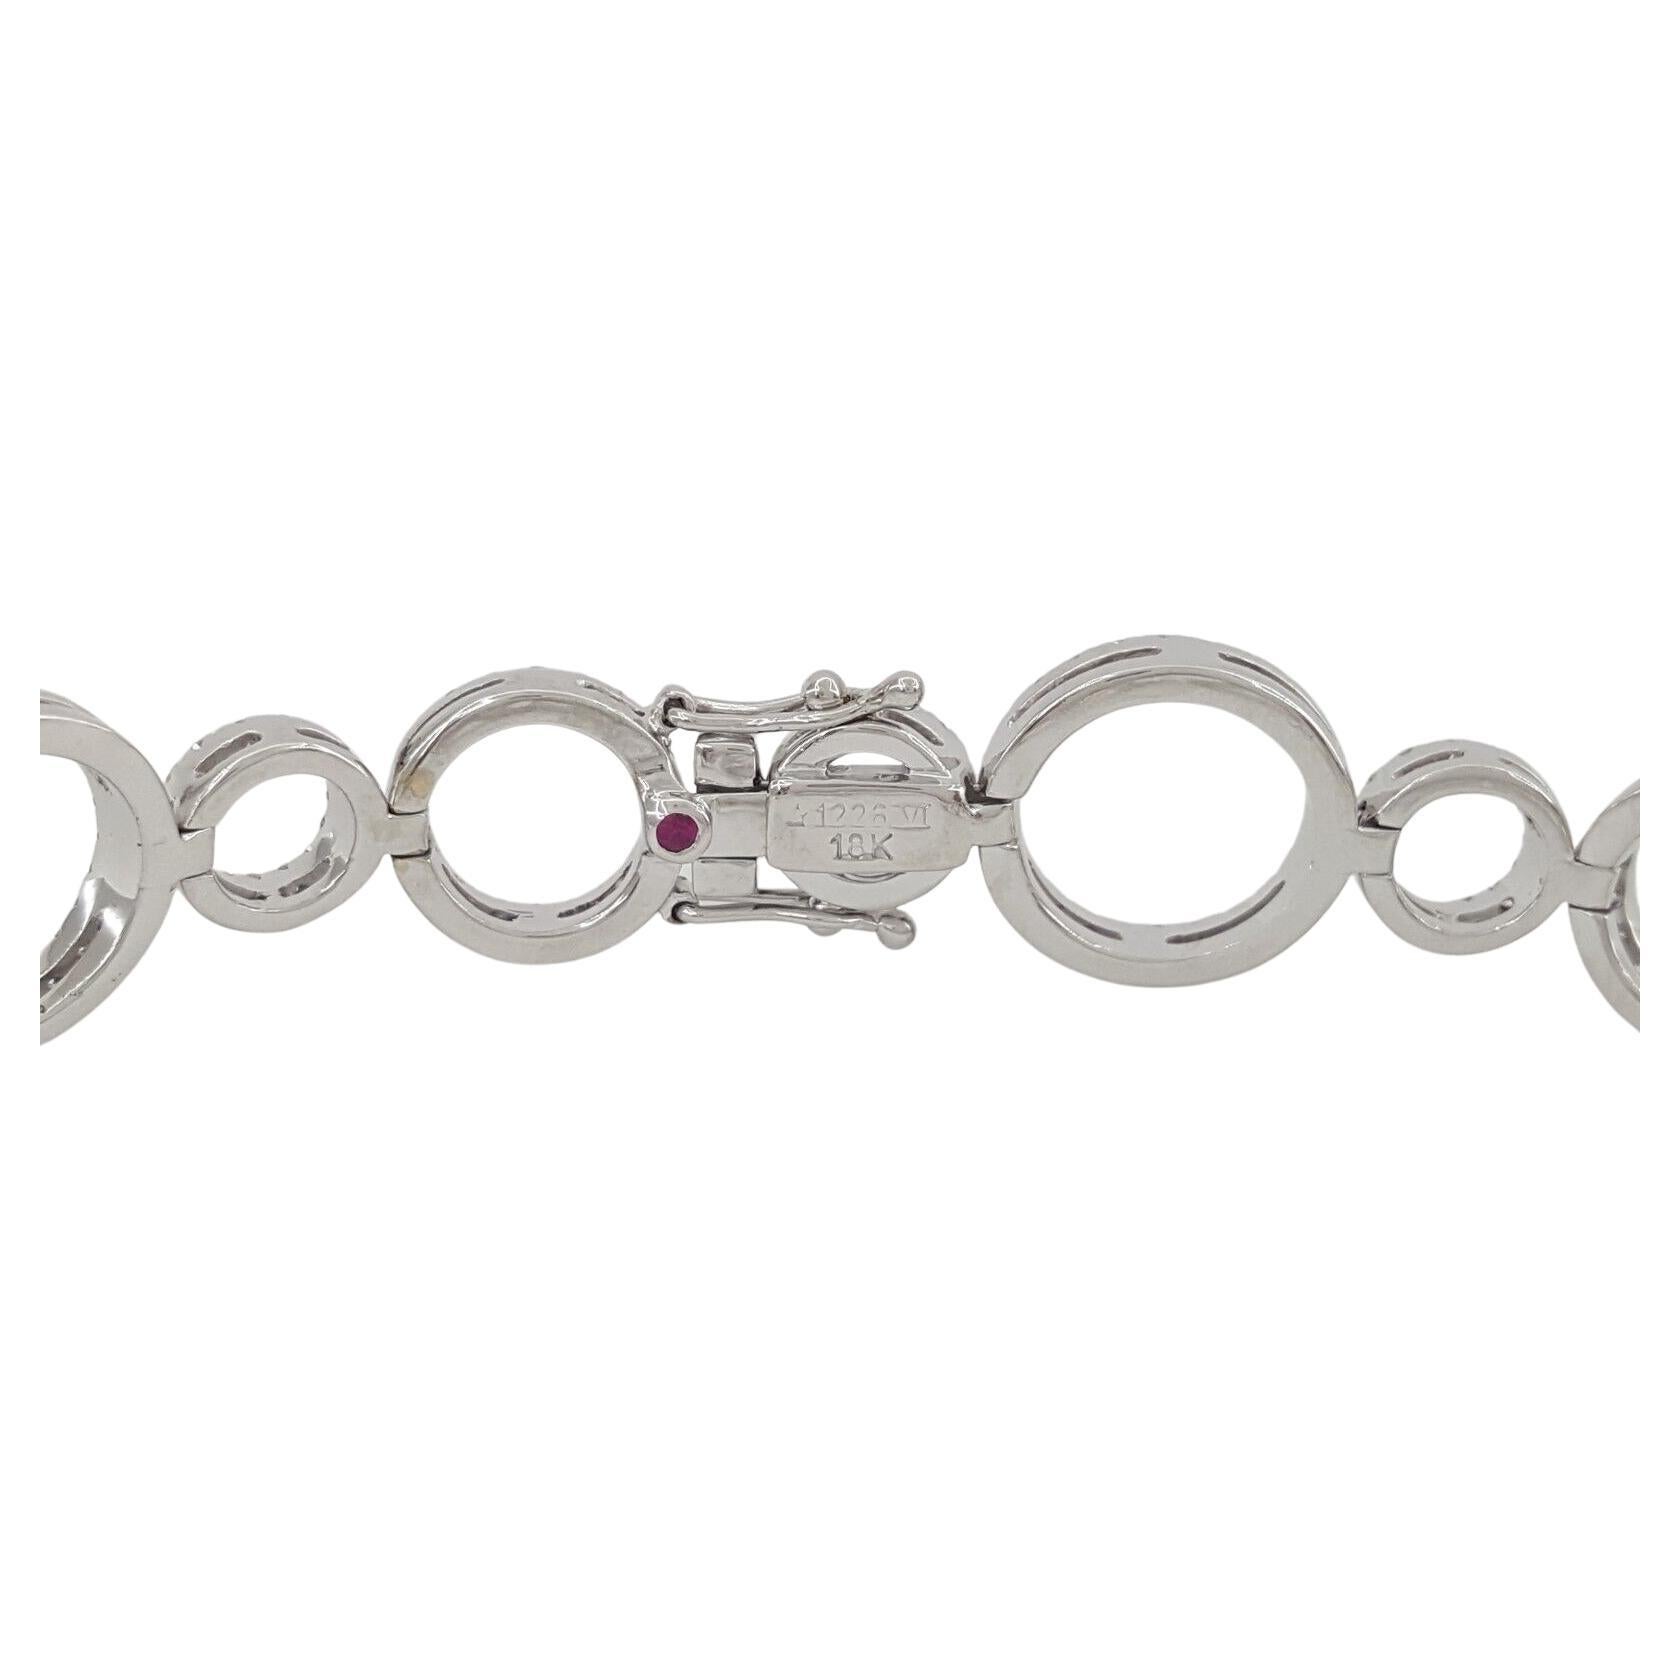 Roberto Coin 1.9 ct Total Weight Round Brilliant Cut Diamonds Circle Link Bracelet in 18K White Gold. 

The bracelet weighing 18 grams, with measurements of 7